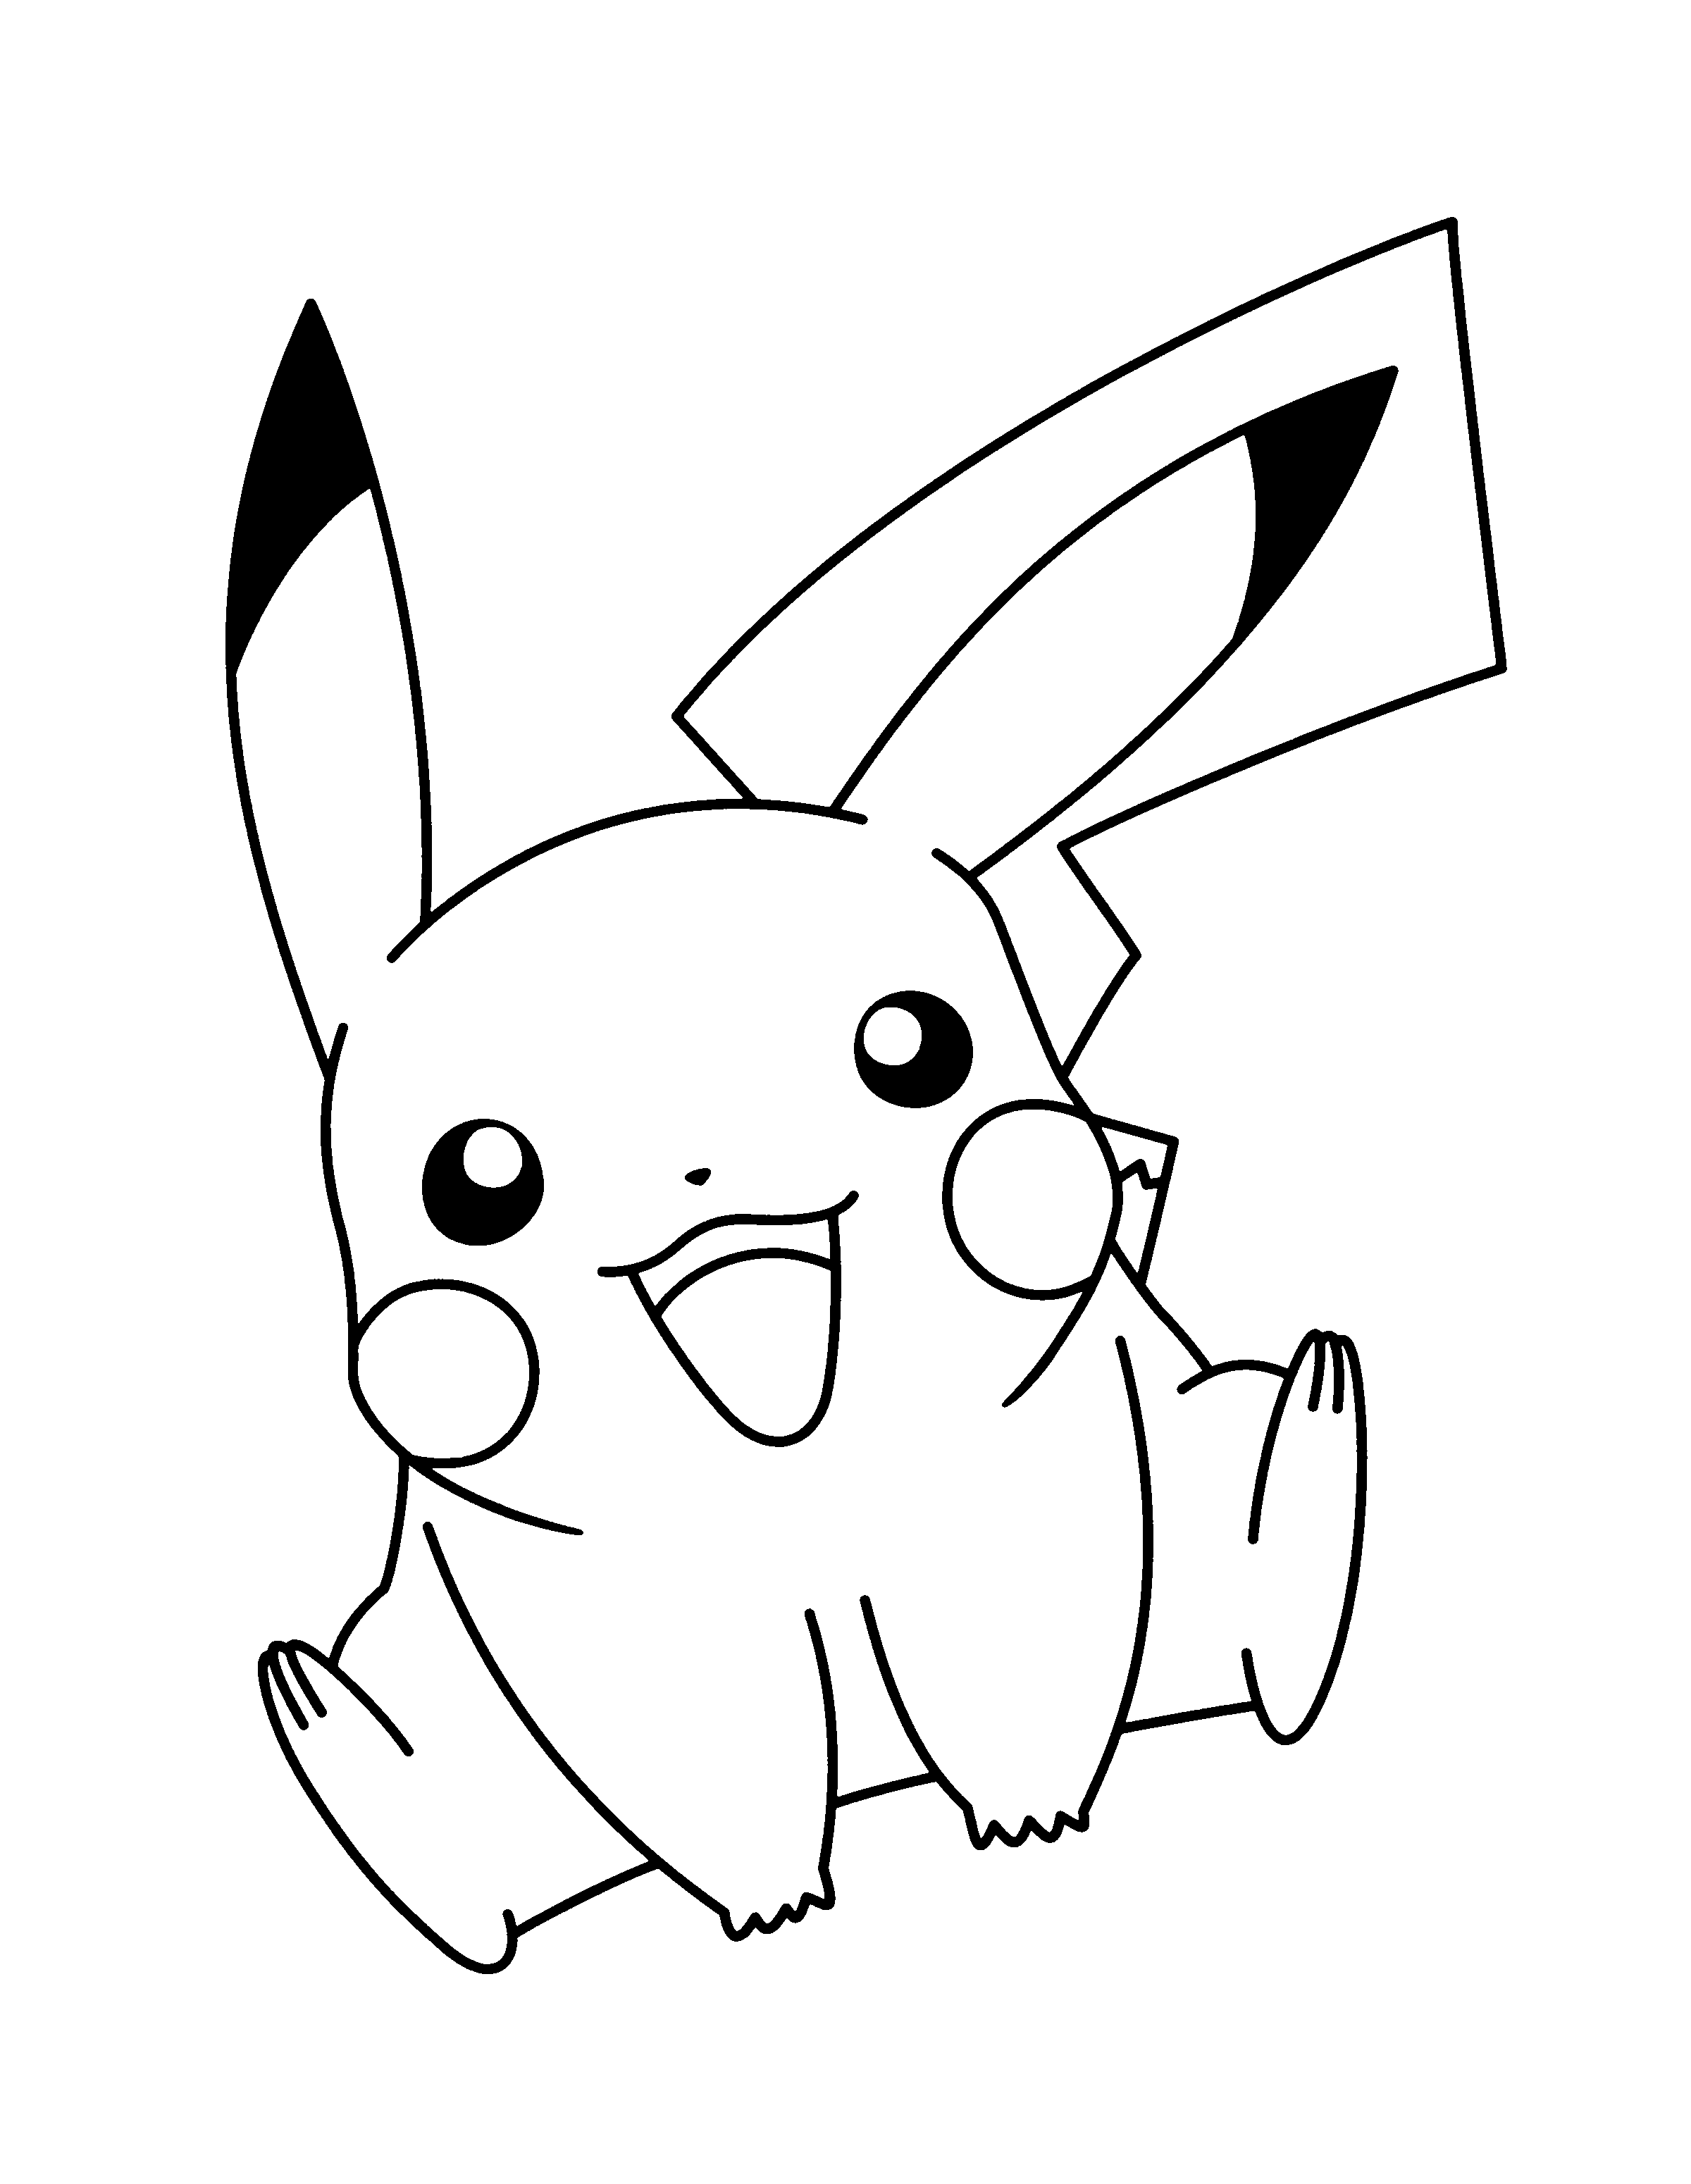 pikachu to color printable pikachu coloring pages for kids cool2bkids pikachu to color 1 1